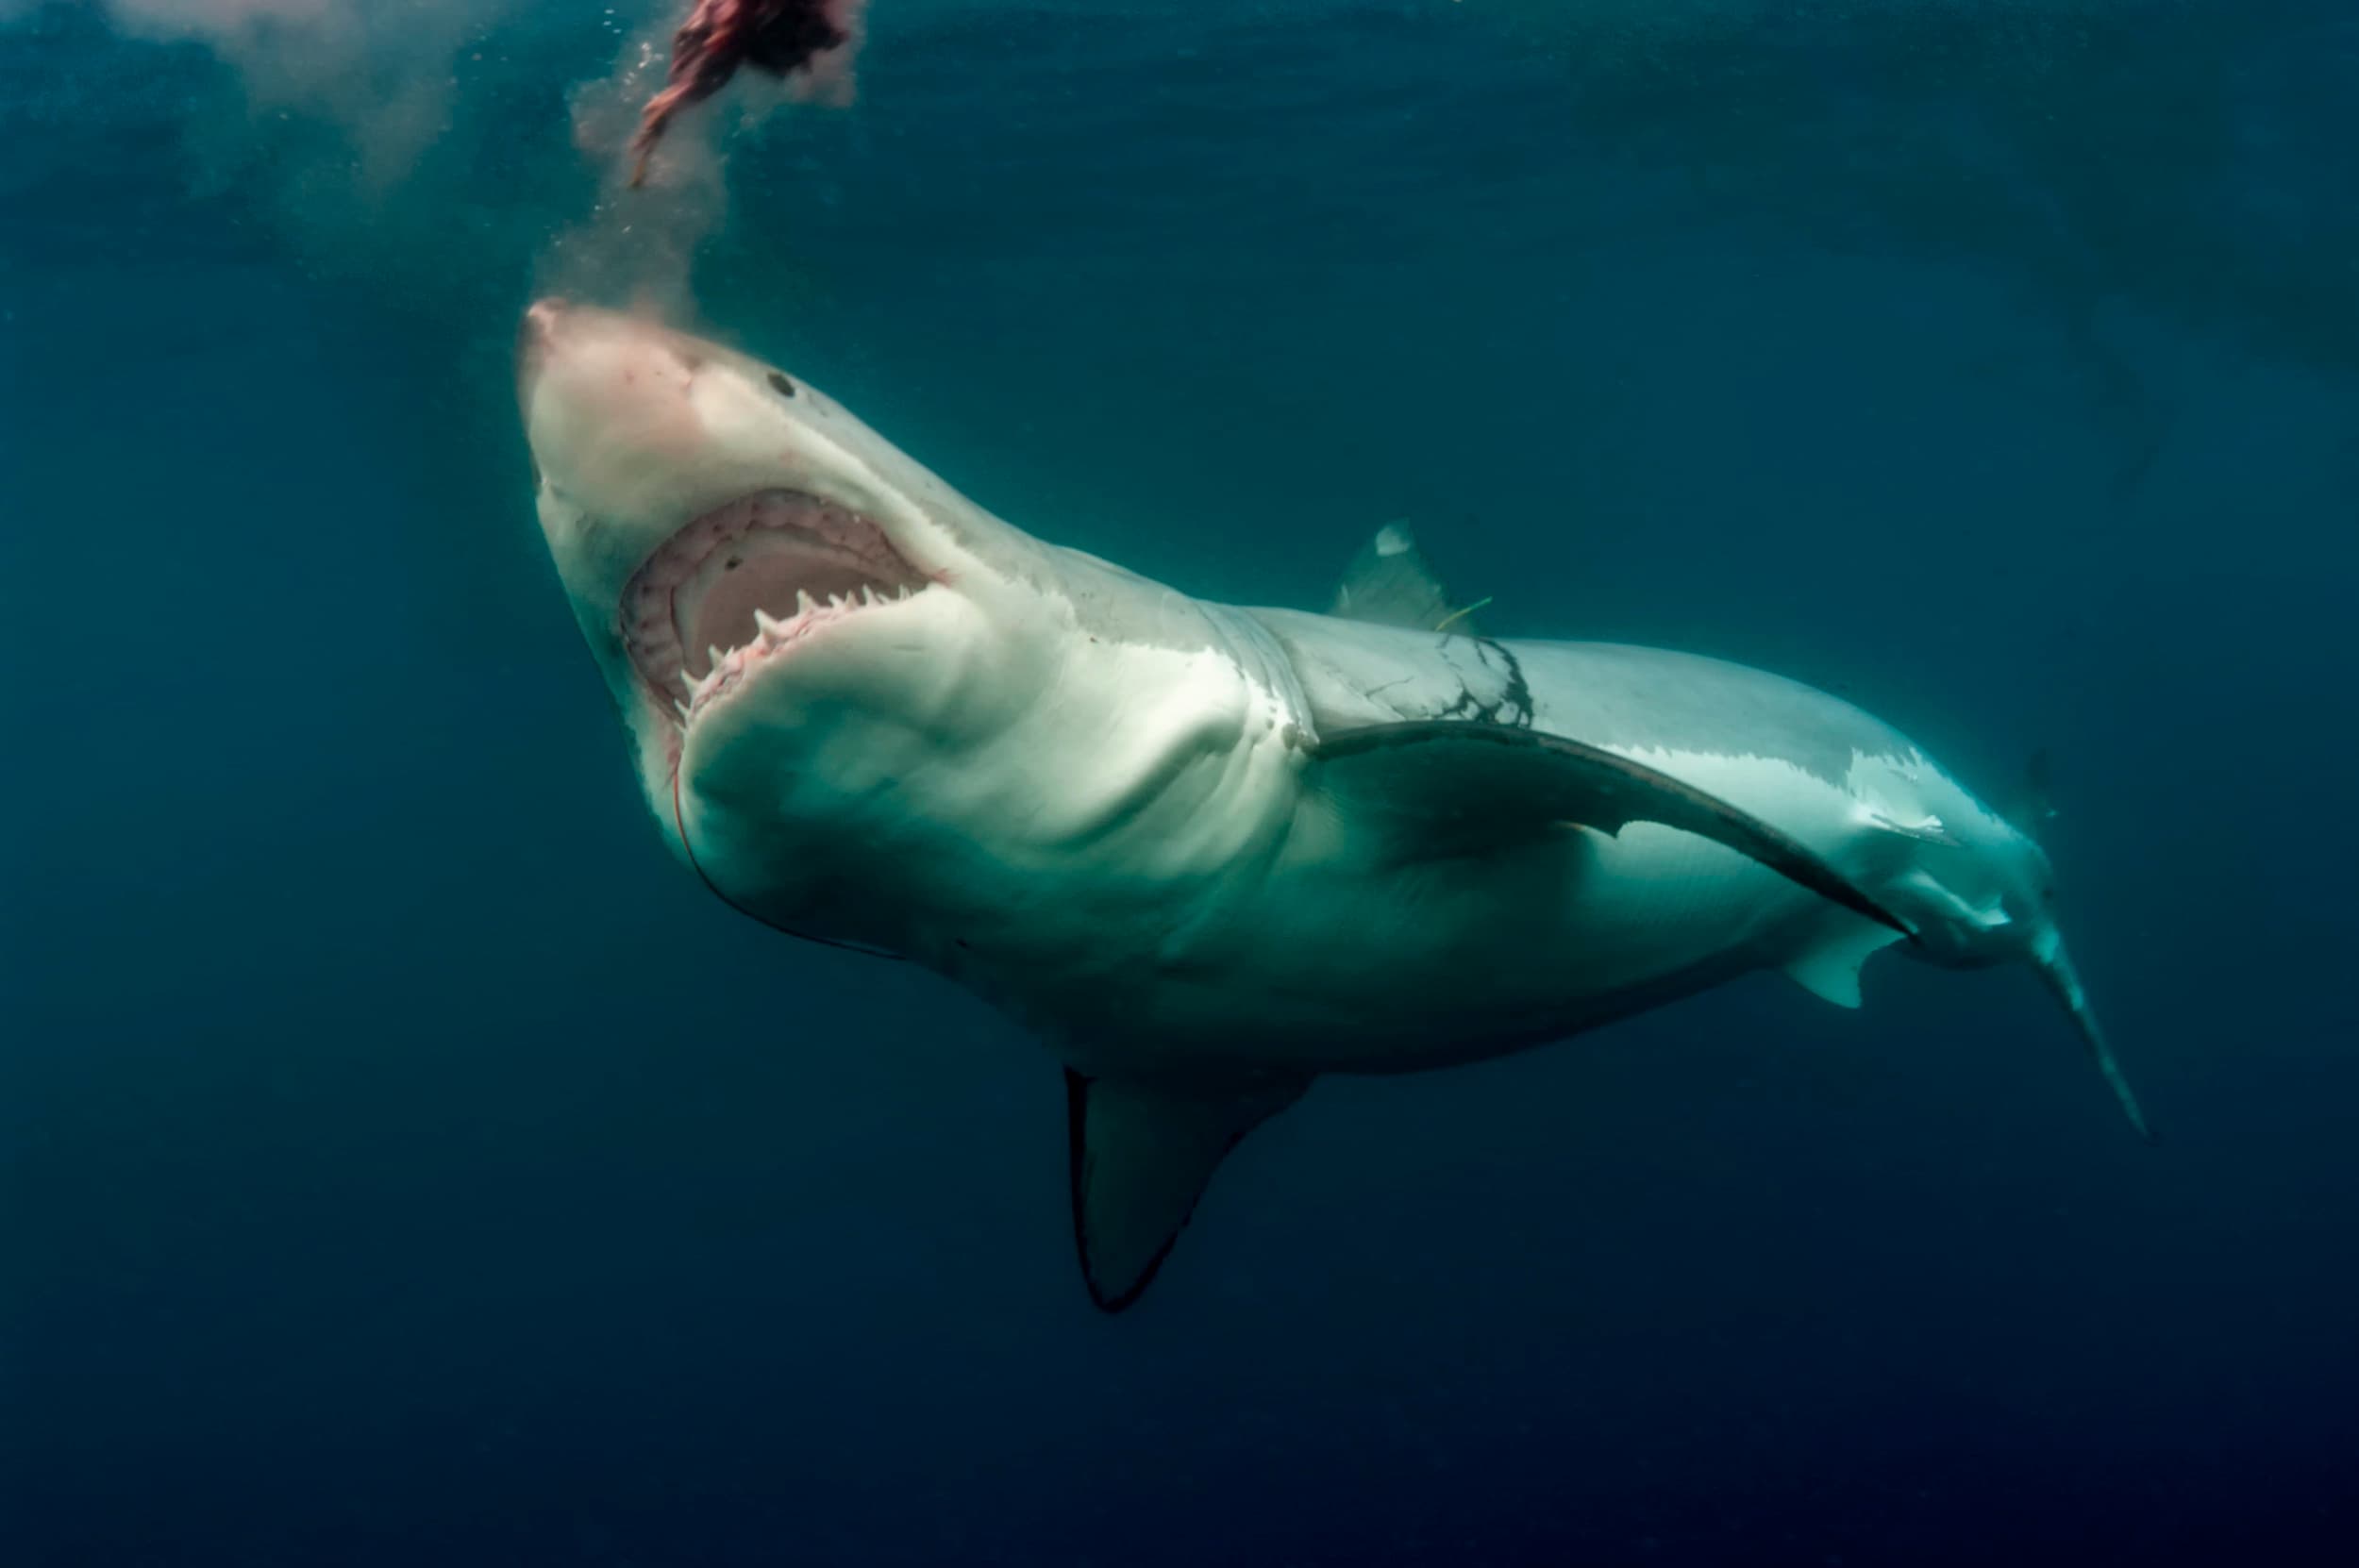 Great white shark chasing a bait